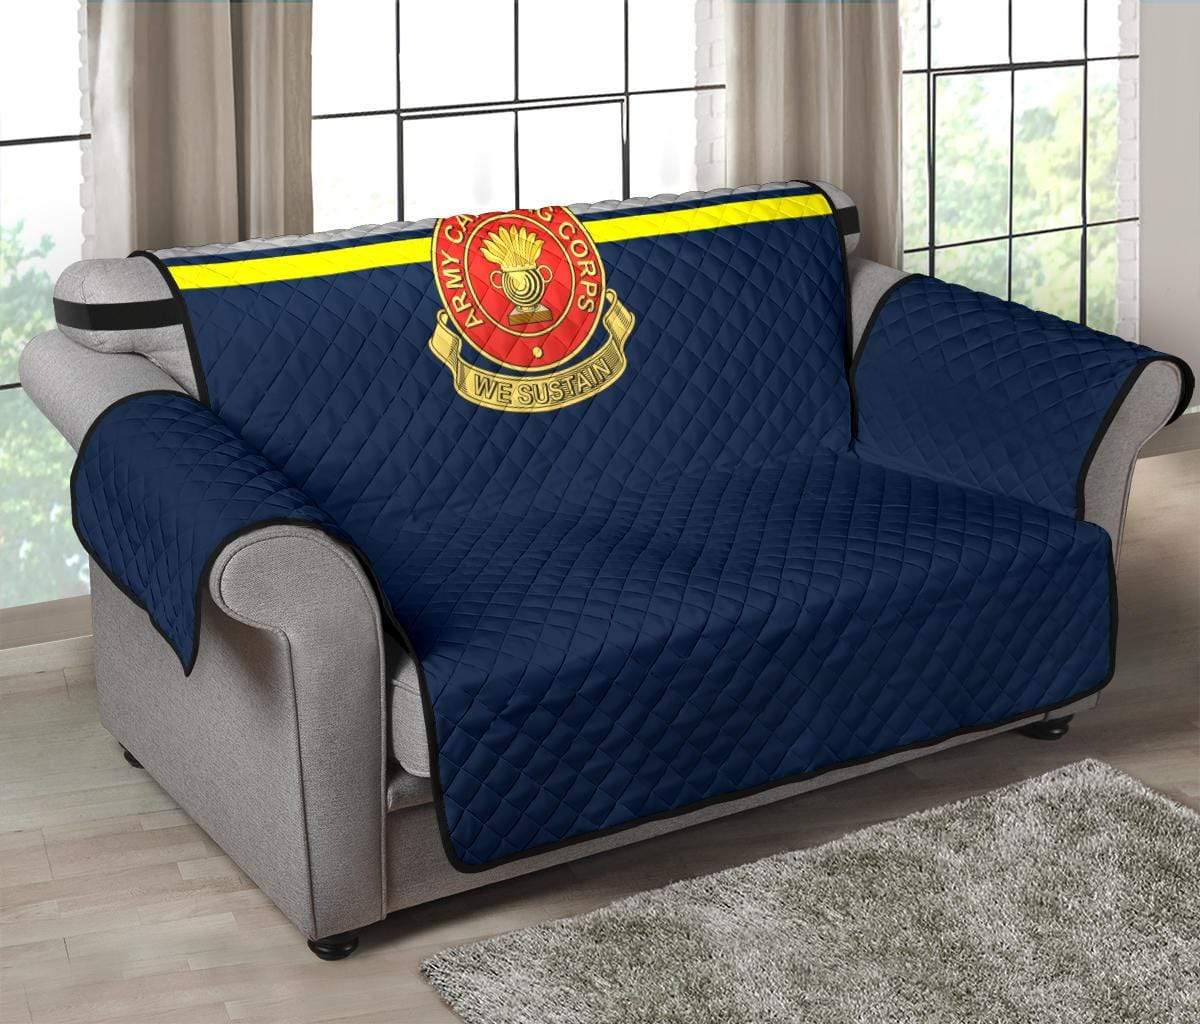 sofa protector 54" Army Catering Corps 2-Seat Sofa Protector